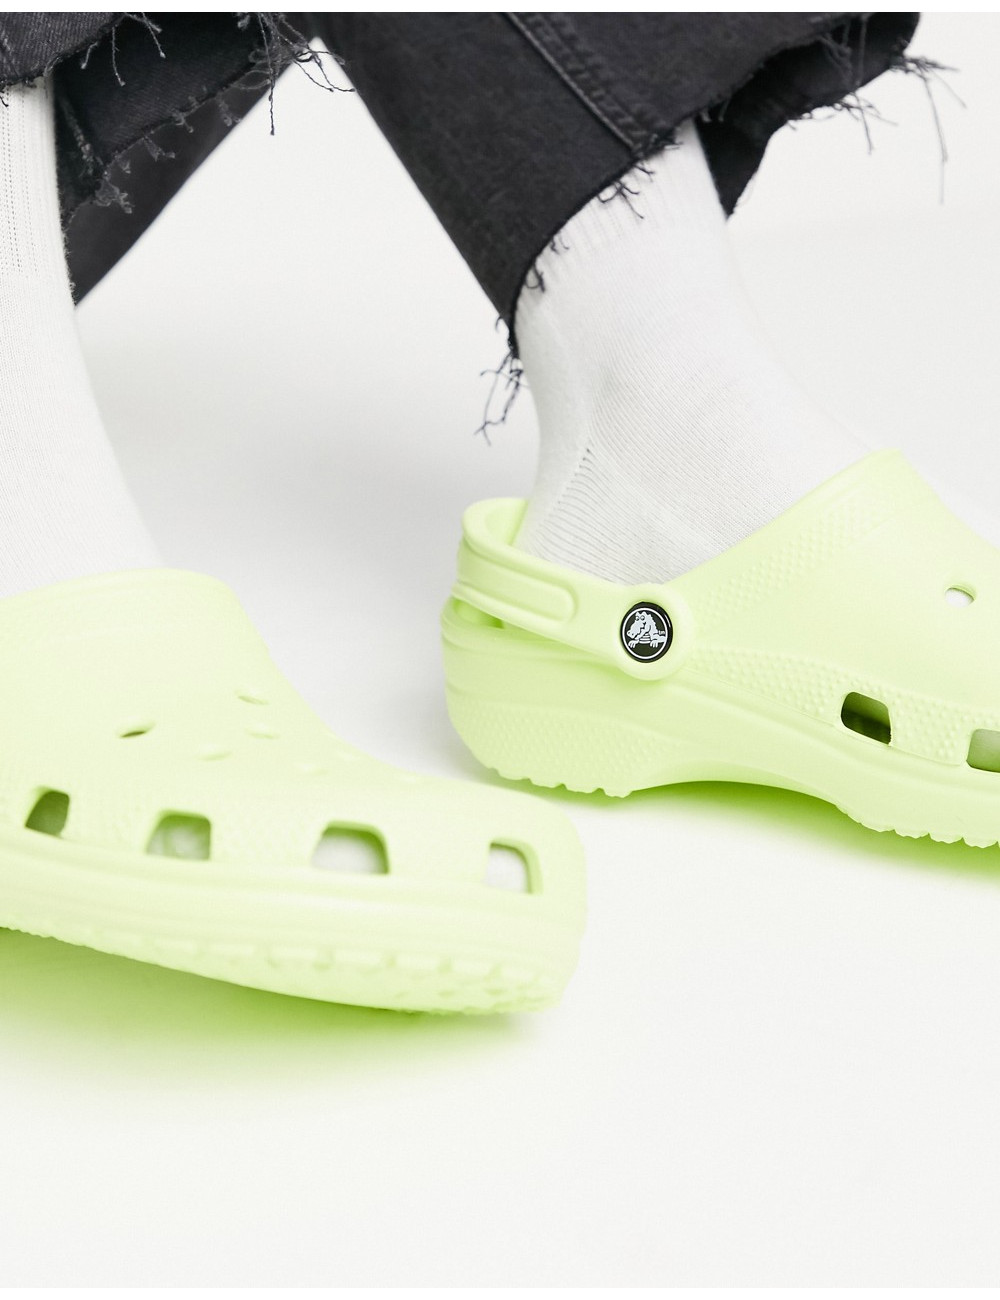 Crocs classic shoe in lime...